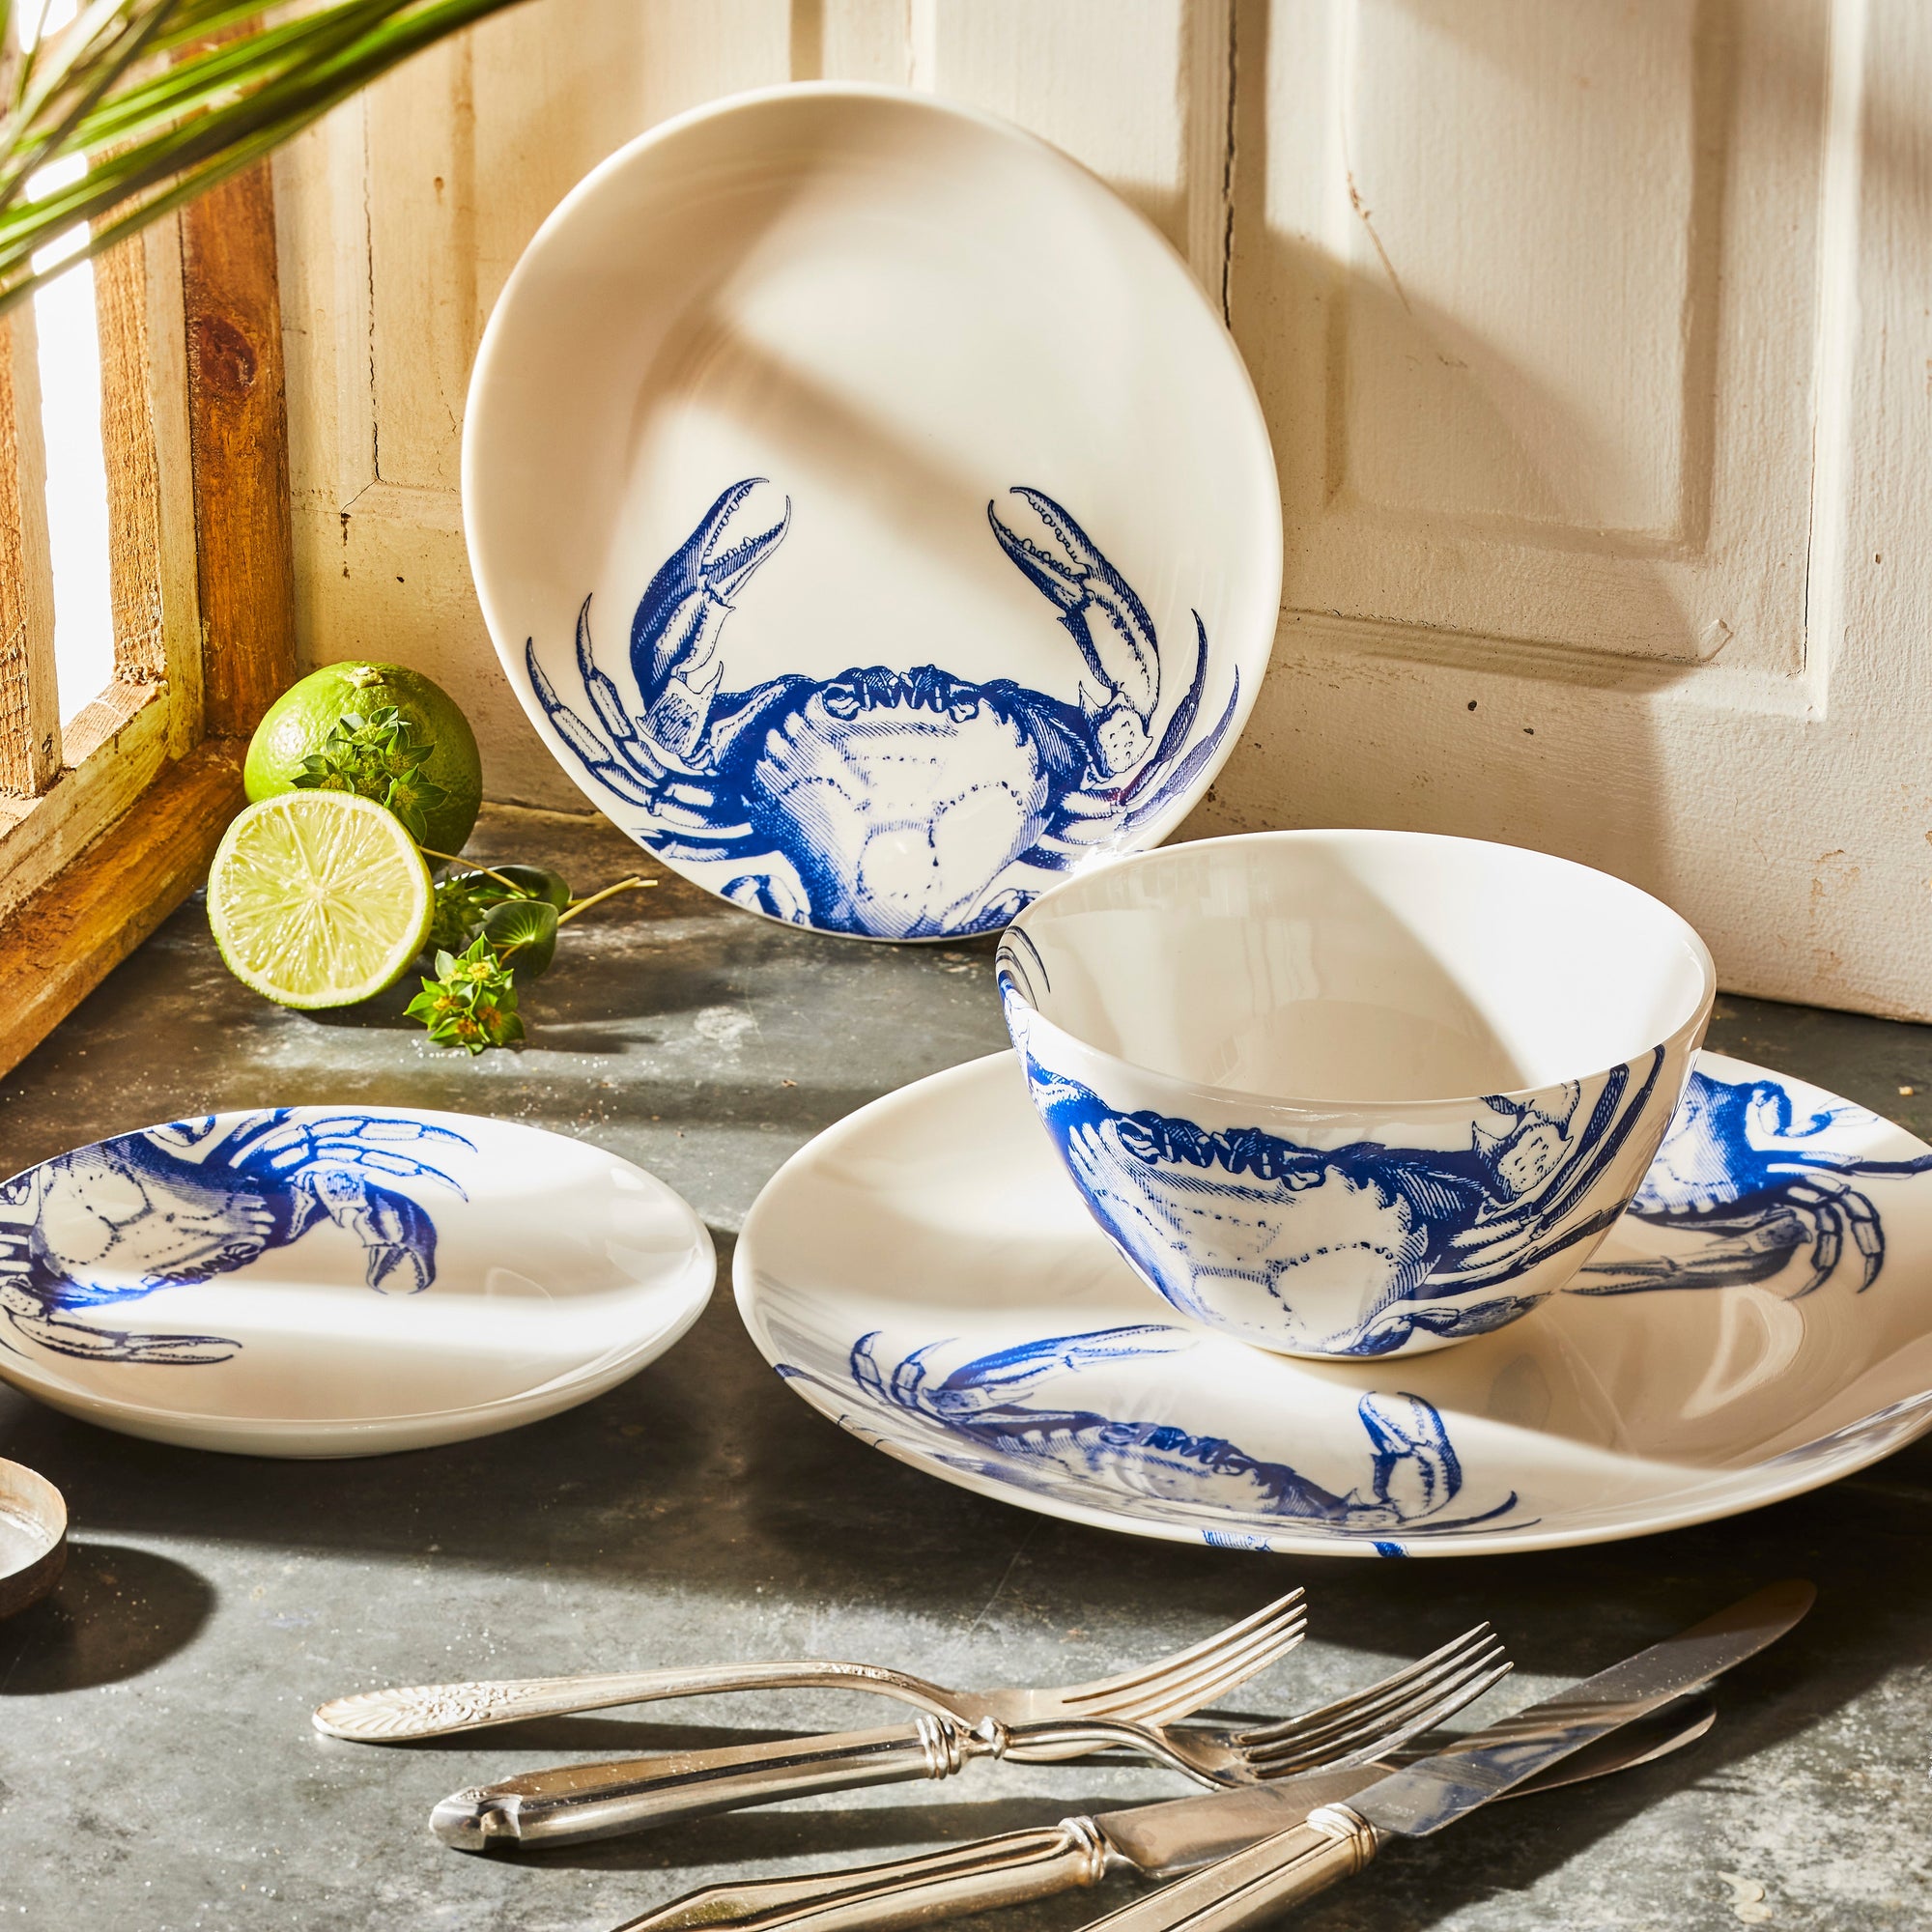 The Caskata Crab Cereal Bowl features a white ceramic base with intricate blue detailing, showcasing an elegant crabs pattern on the exterior.